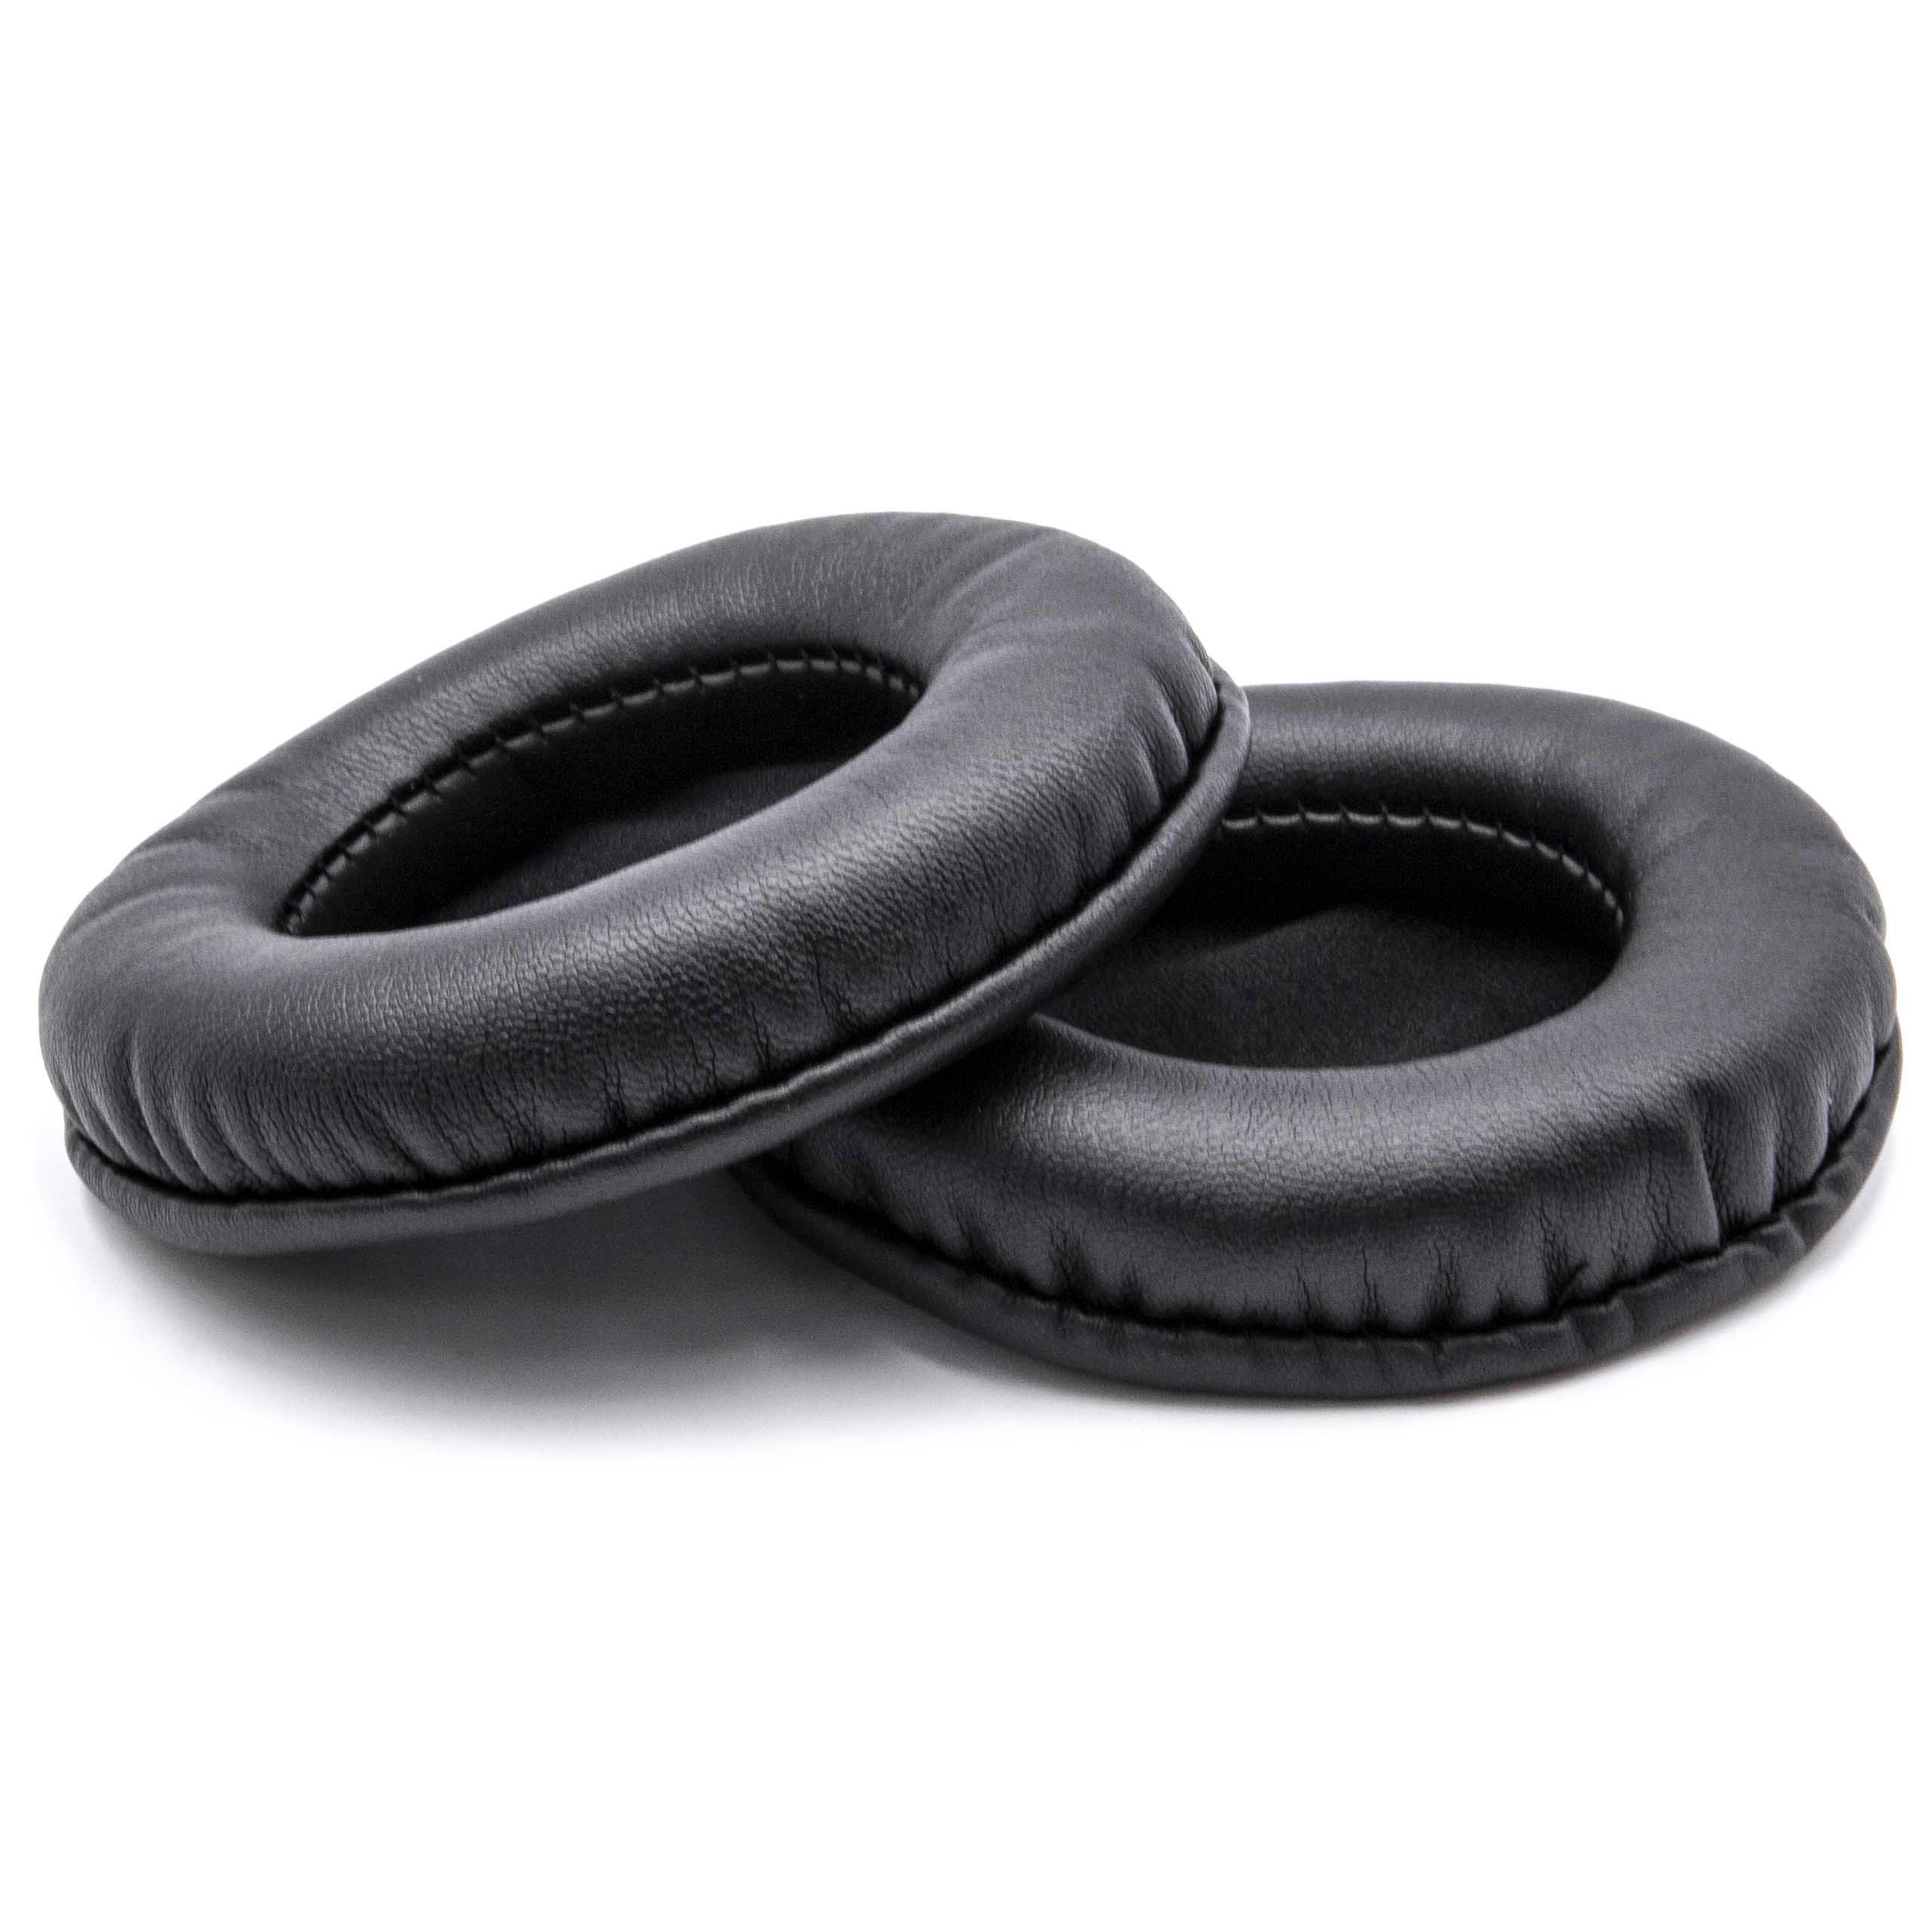 2x Ear Pads suitable for Panasonic / headphones which require 95mm ear pads / Sony RP WF910H Headphones etc. -